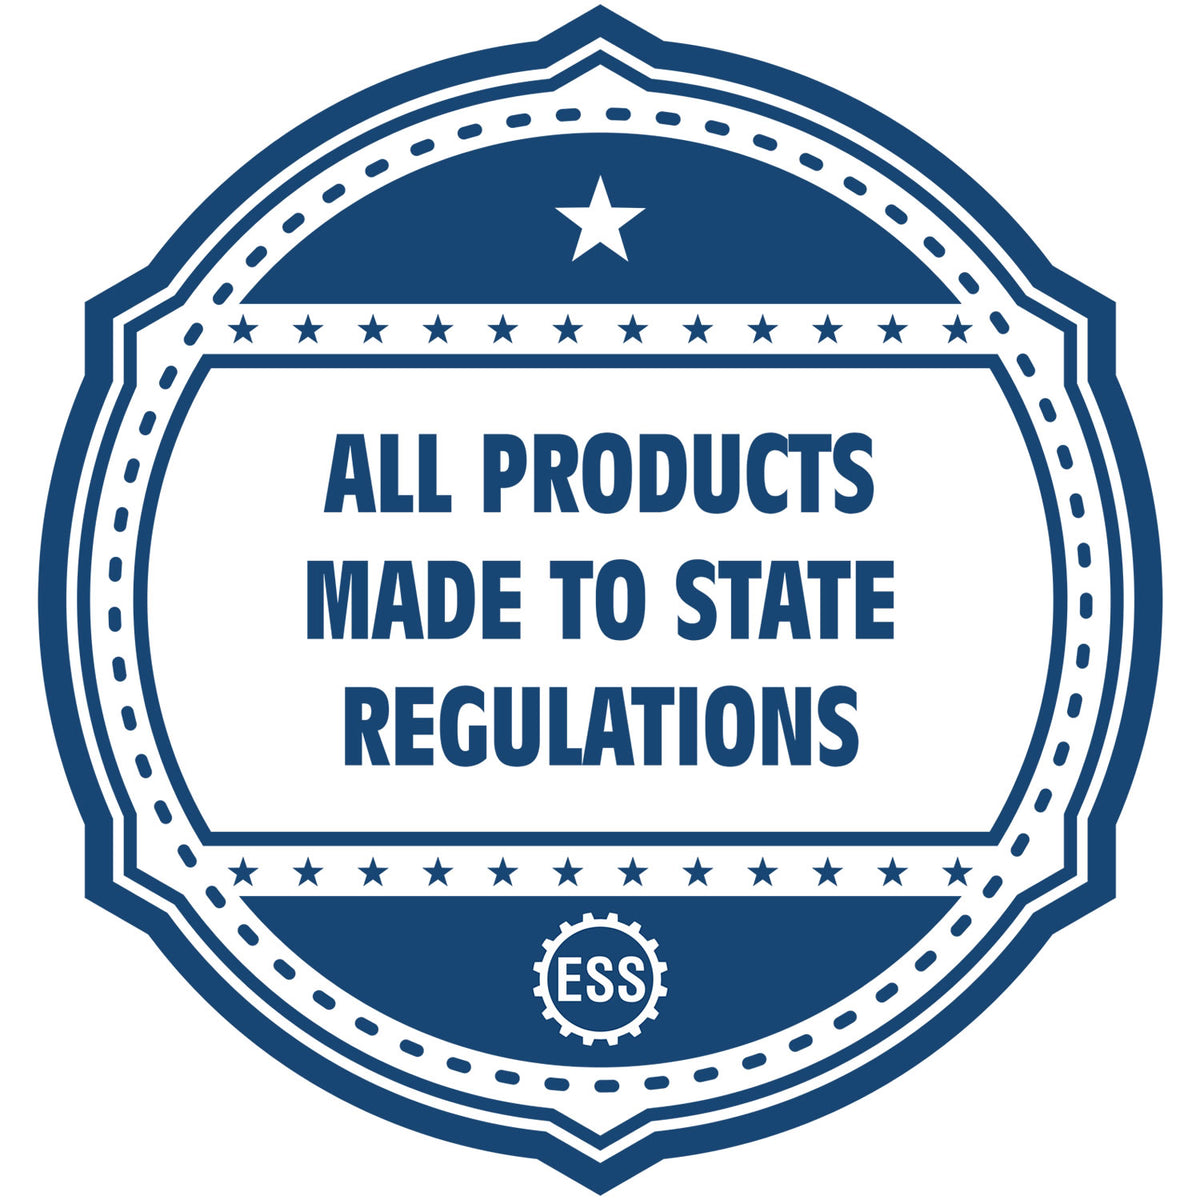 An icon or badge element for the Soft Missouri Professional Engineer Seal showing that this product is made in compliance with state regulations.